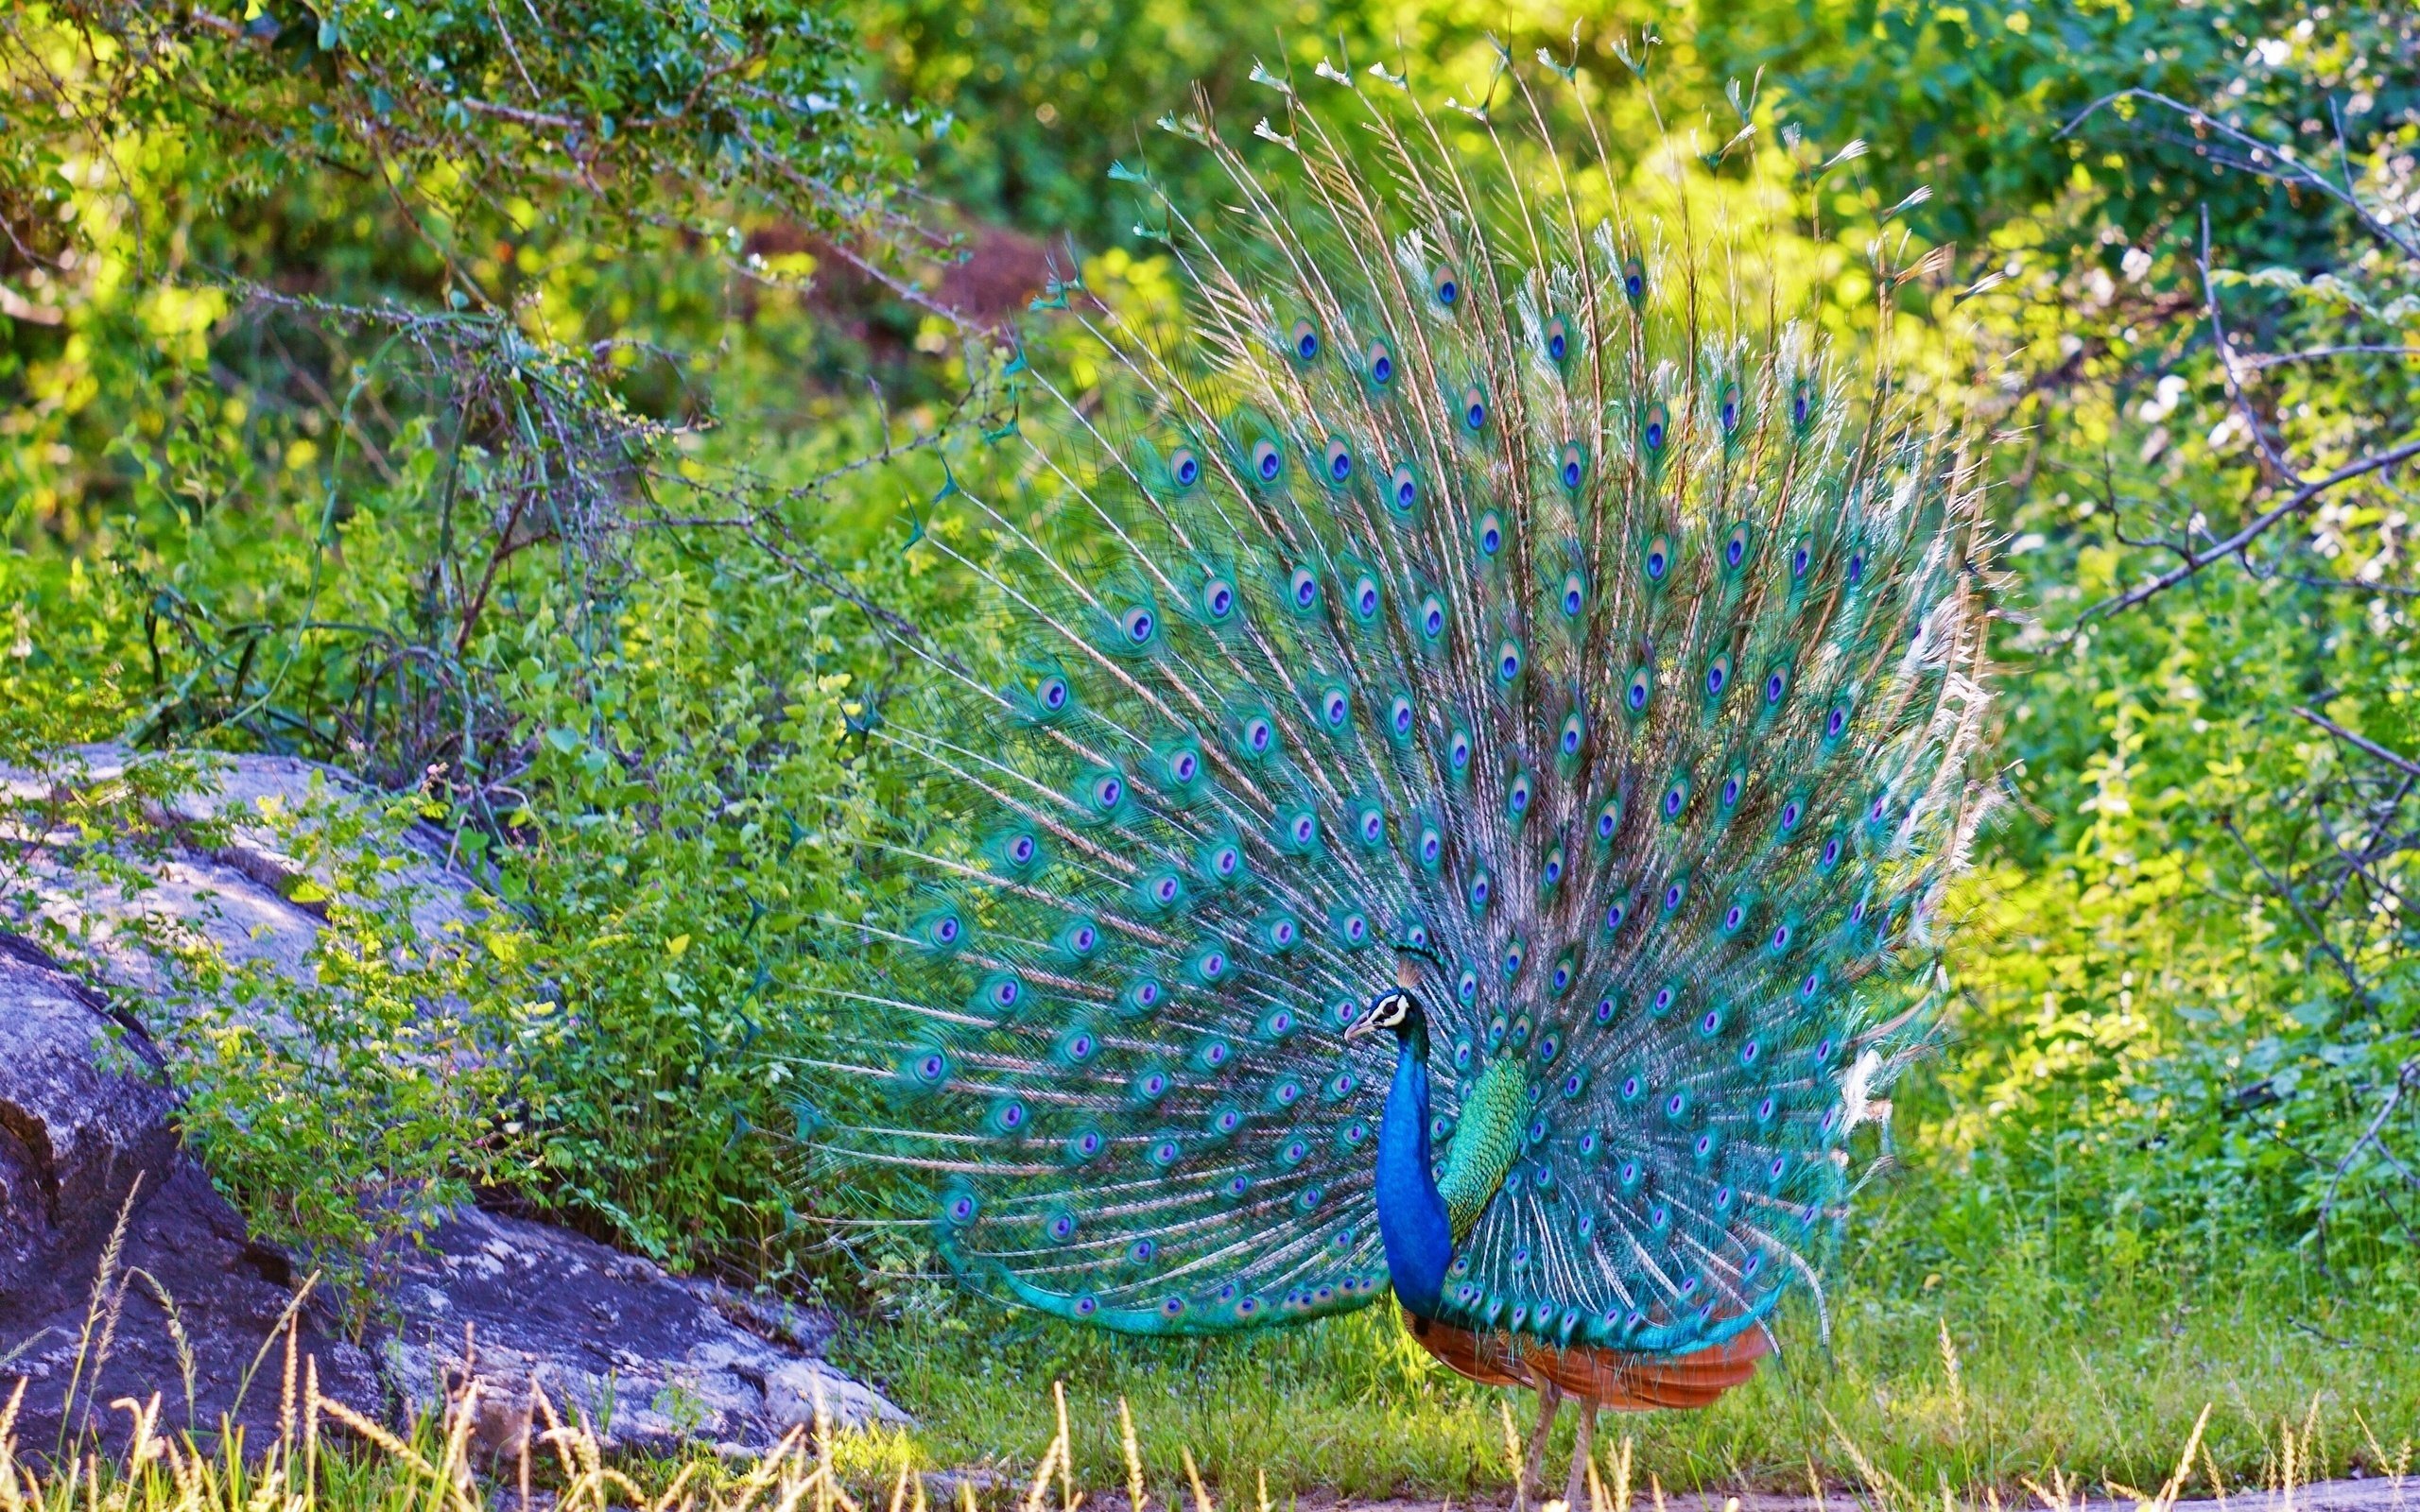 Peacock feathers plumage blue nature wallpaper 2560x1600 424494